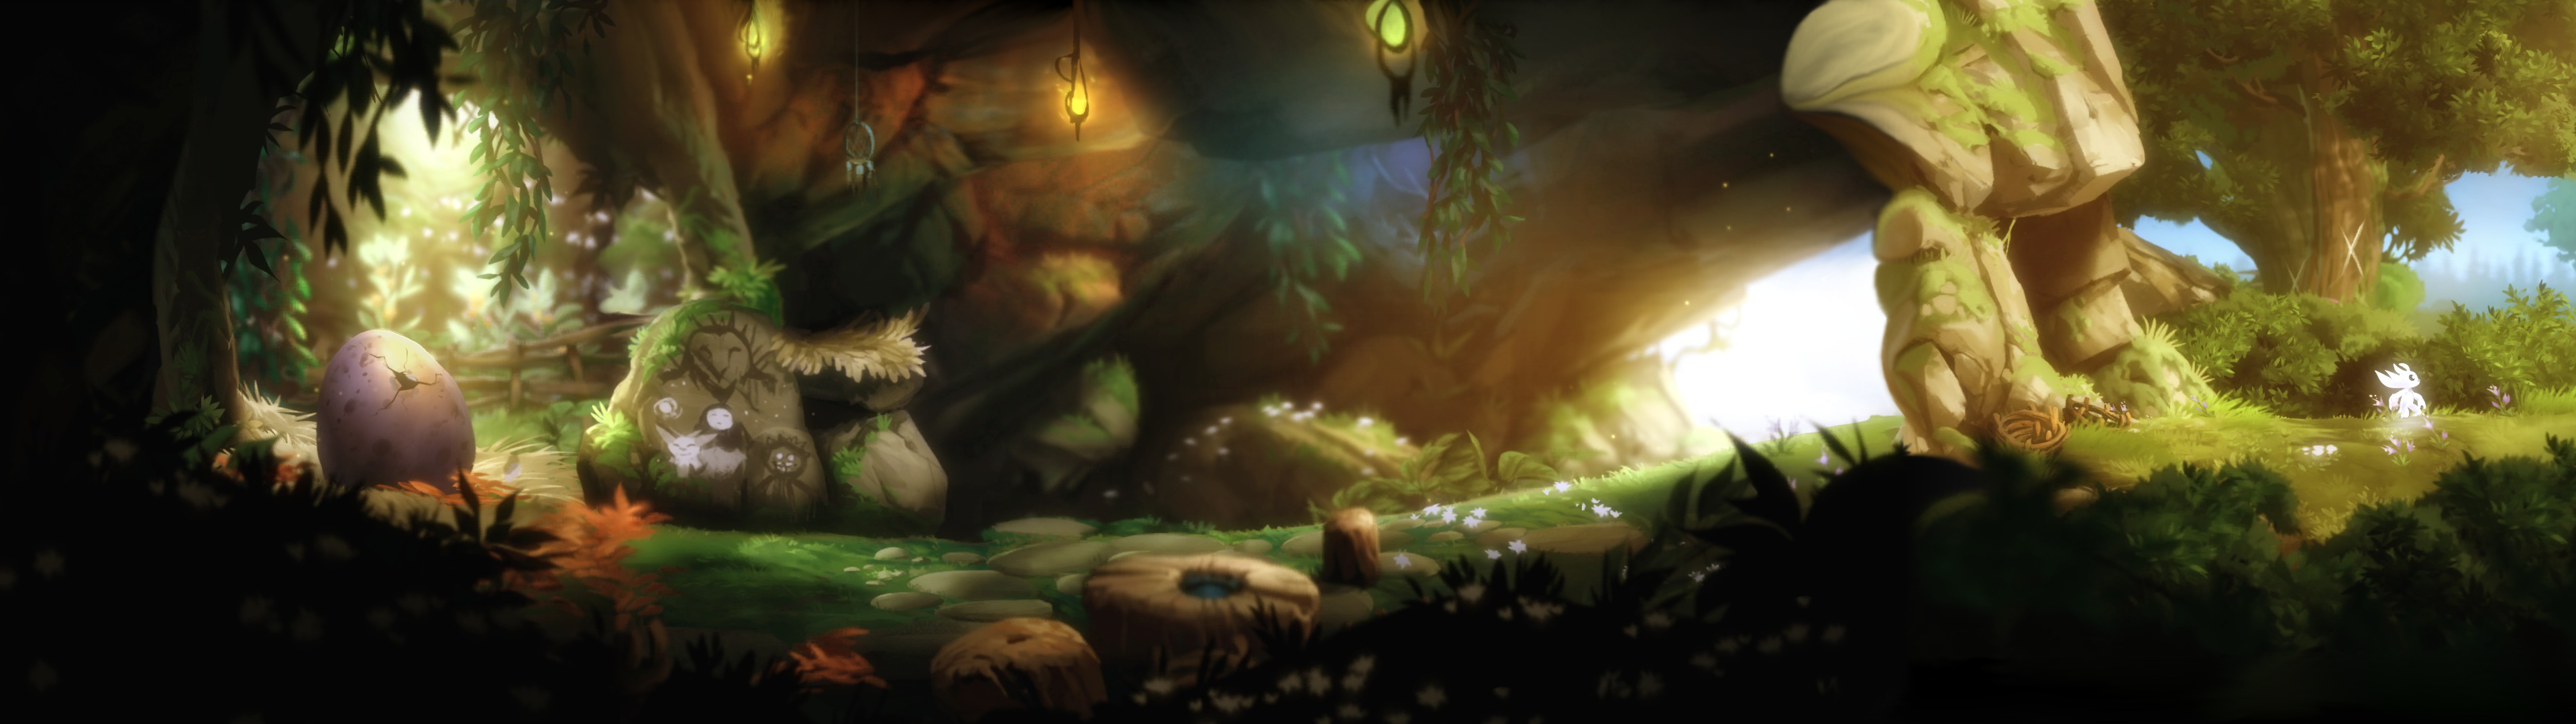 Video Game Ori And The Blind Forest 3840x1080